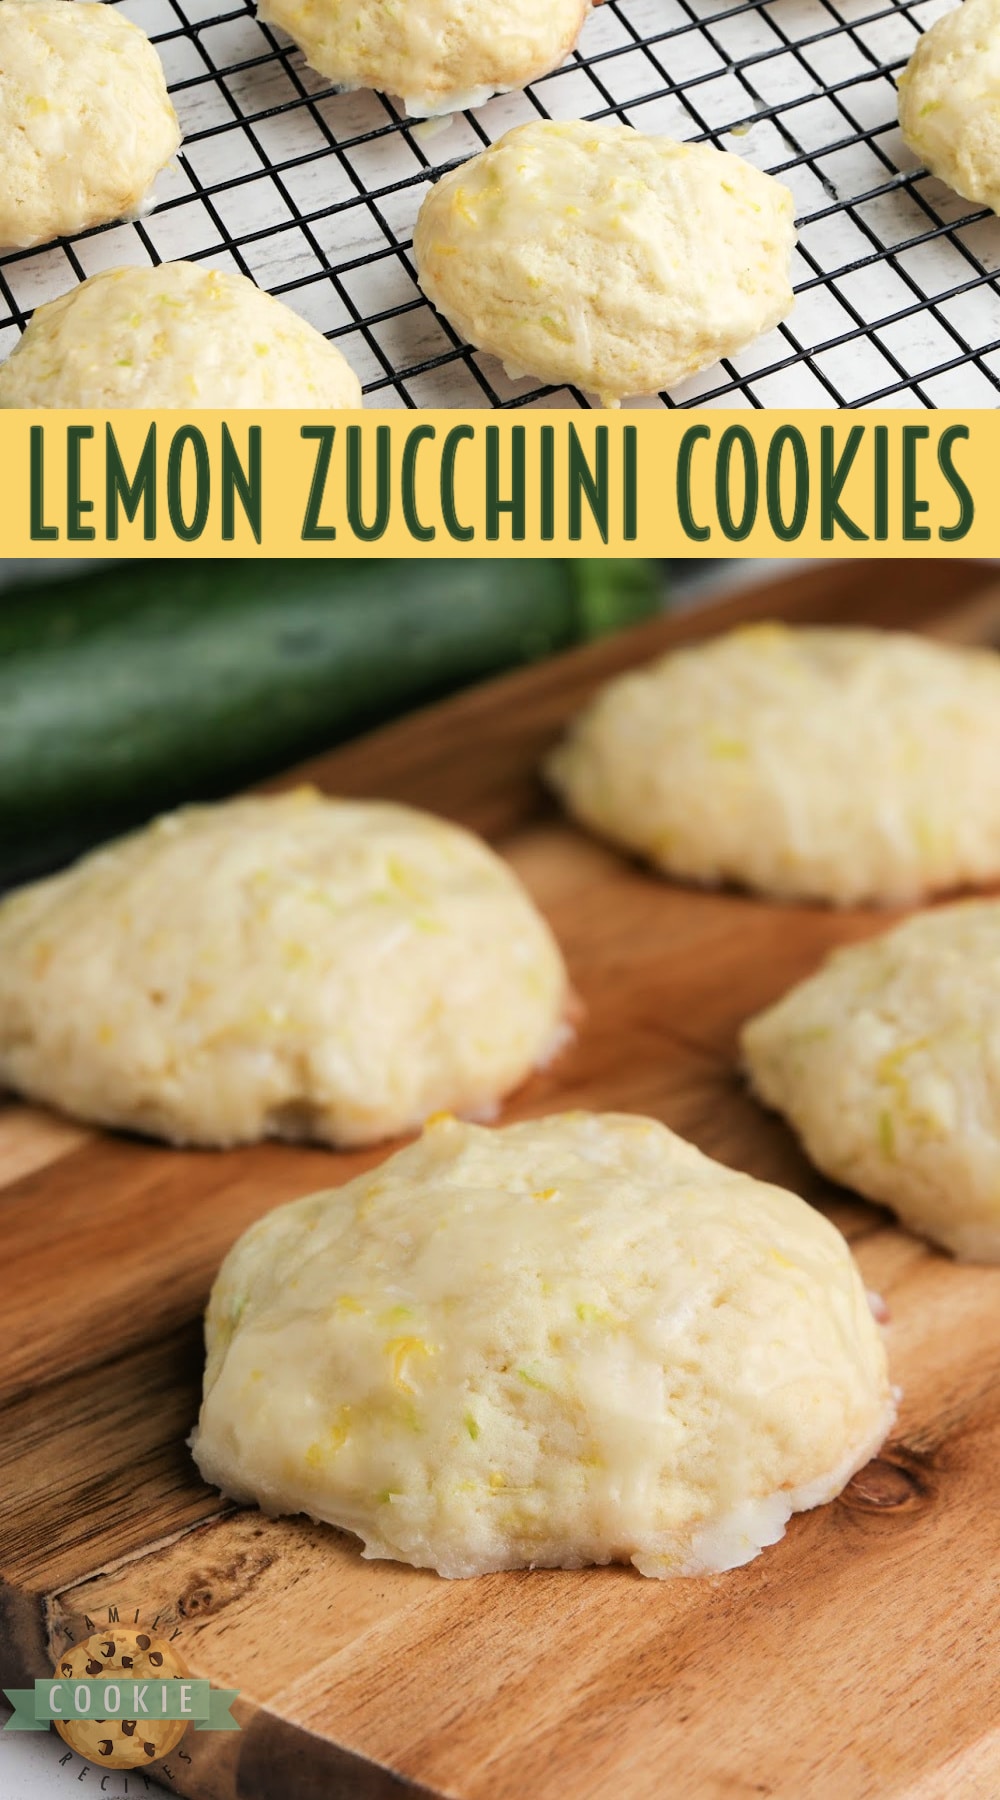 Lemon Zucchini Cookies made with lots of lemon flavor and shredded zucchini. Topped with a delicious lemon glaze, these zucchini cookies are absolutely incredible!  via @buttergirls